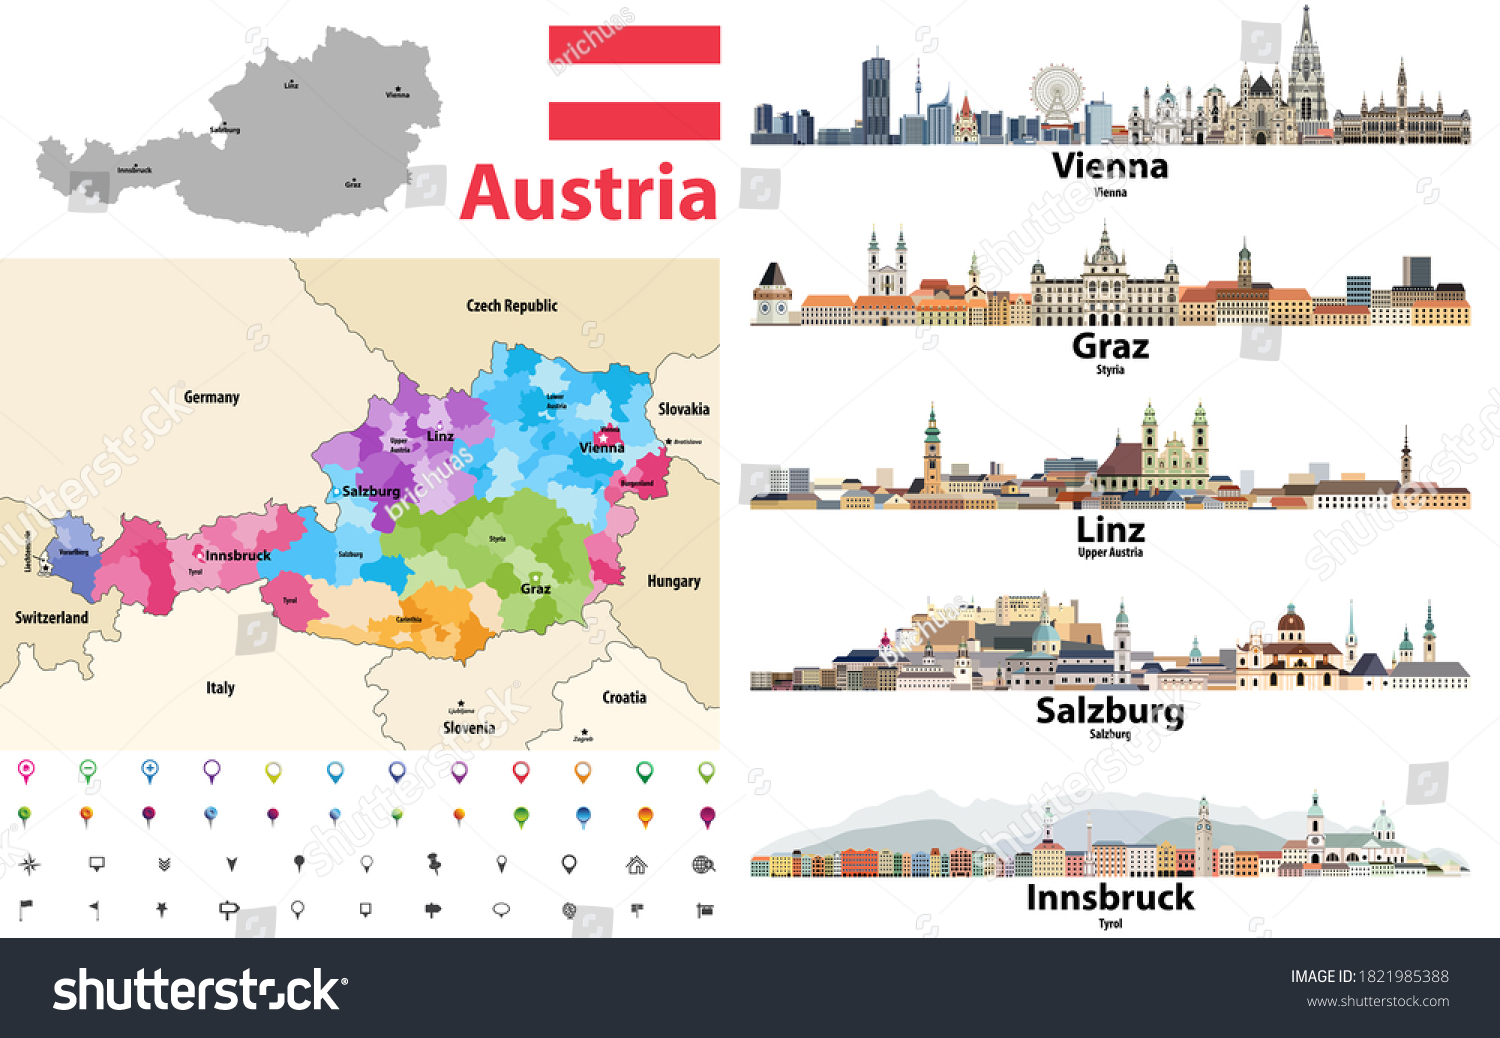 Stock Vector Austria Map Colored By States Showing Districts Boundaries With Neighbouring Countries Austrian 1821985388 